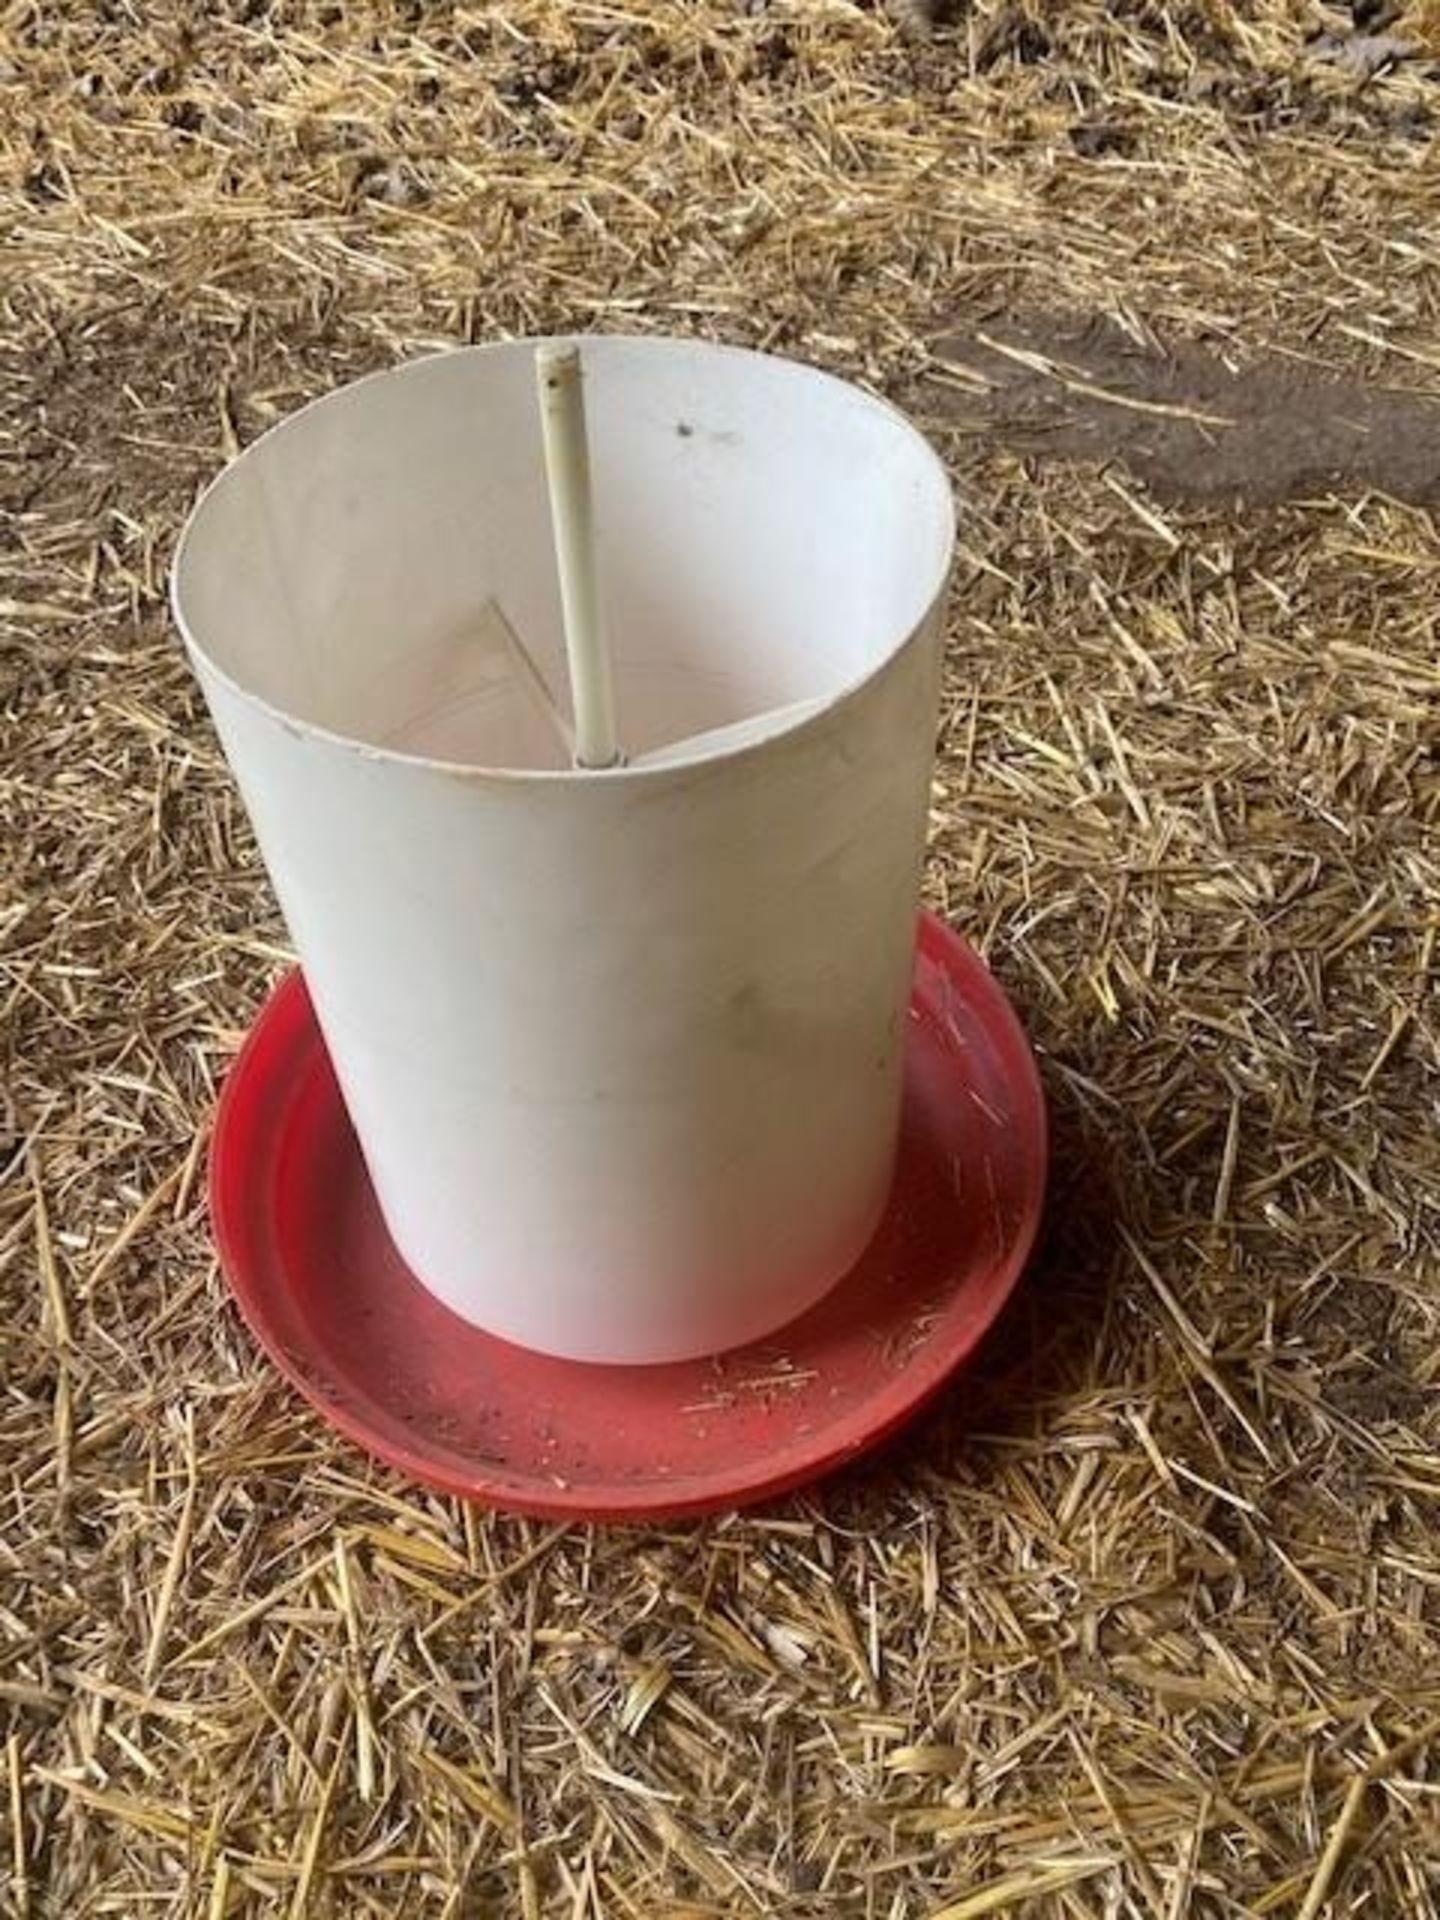 25 x EB poultry feed tubes - Image 2 of 2